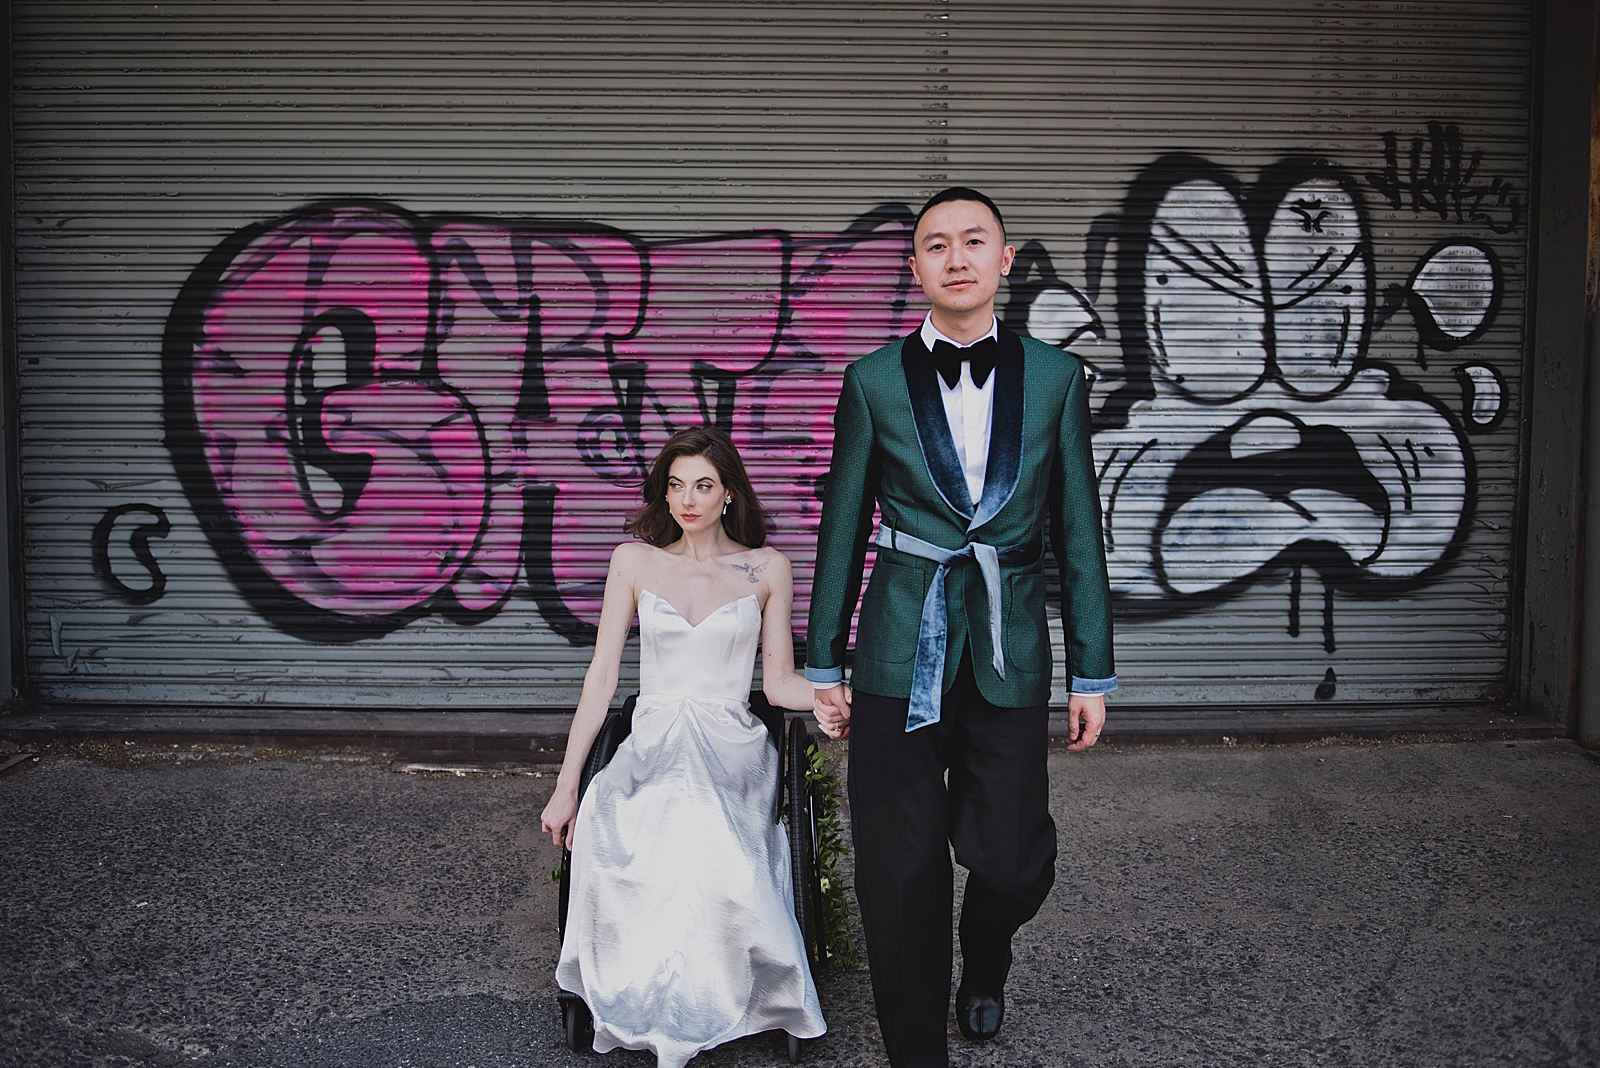 Shot of the bride and groom holding hands in front of a graffiti wall. 